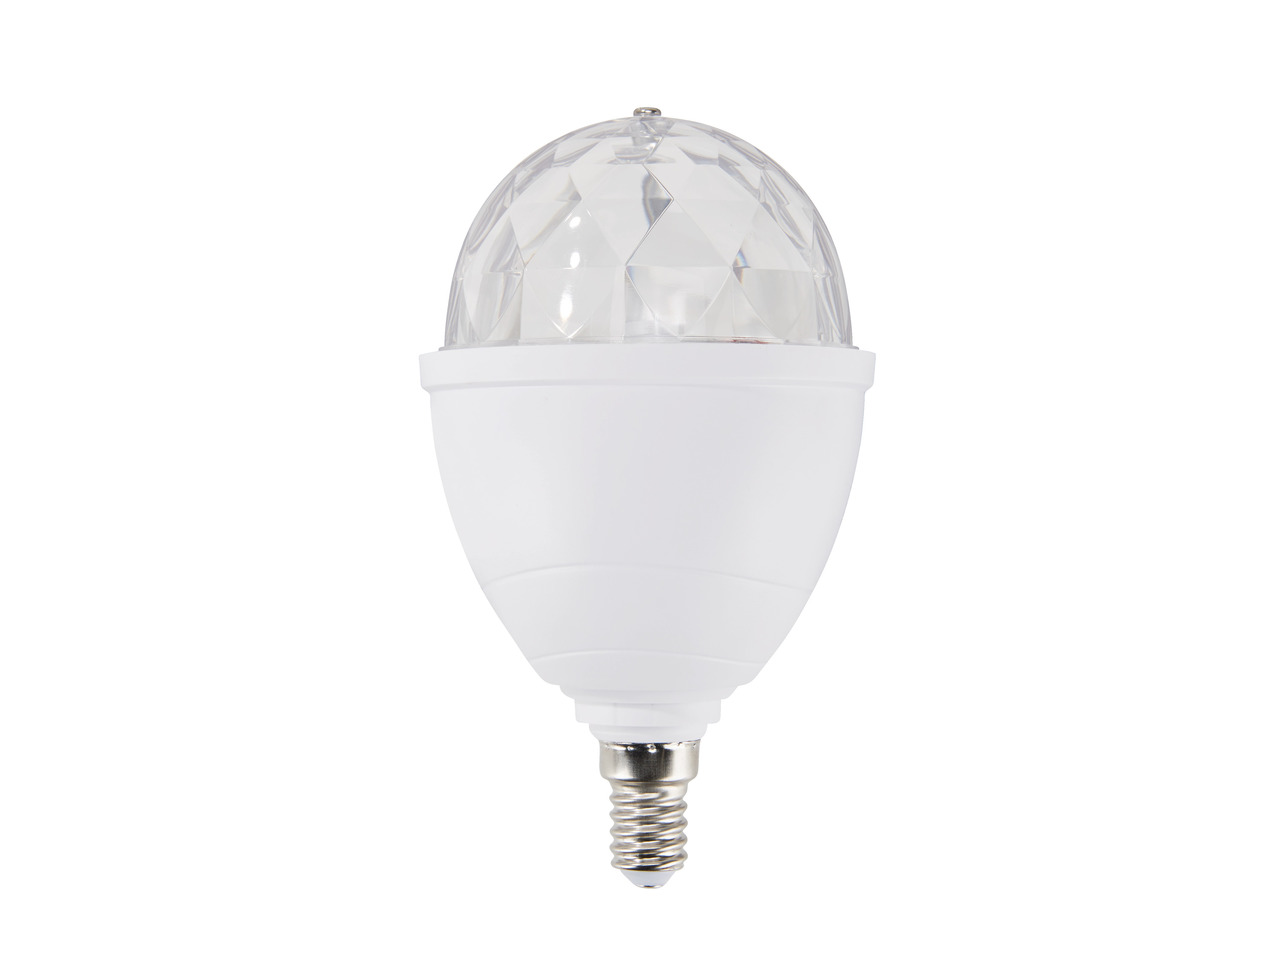 LIVARNO LUX(R) LED-partylampe